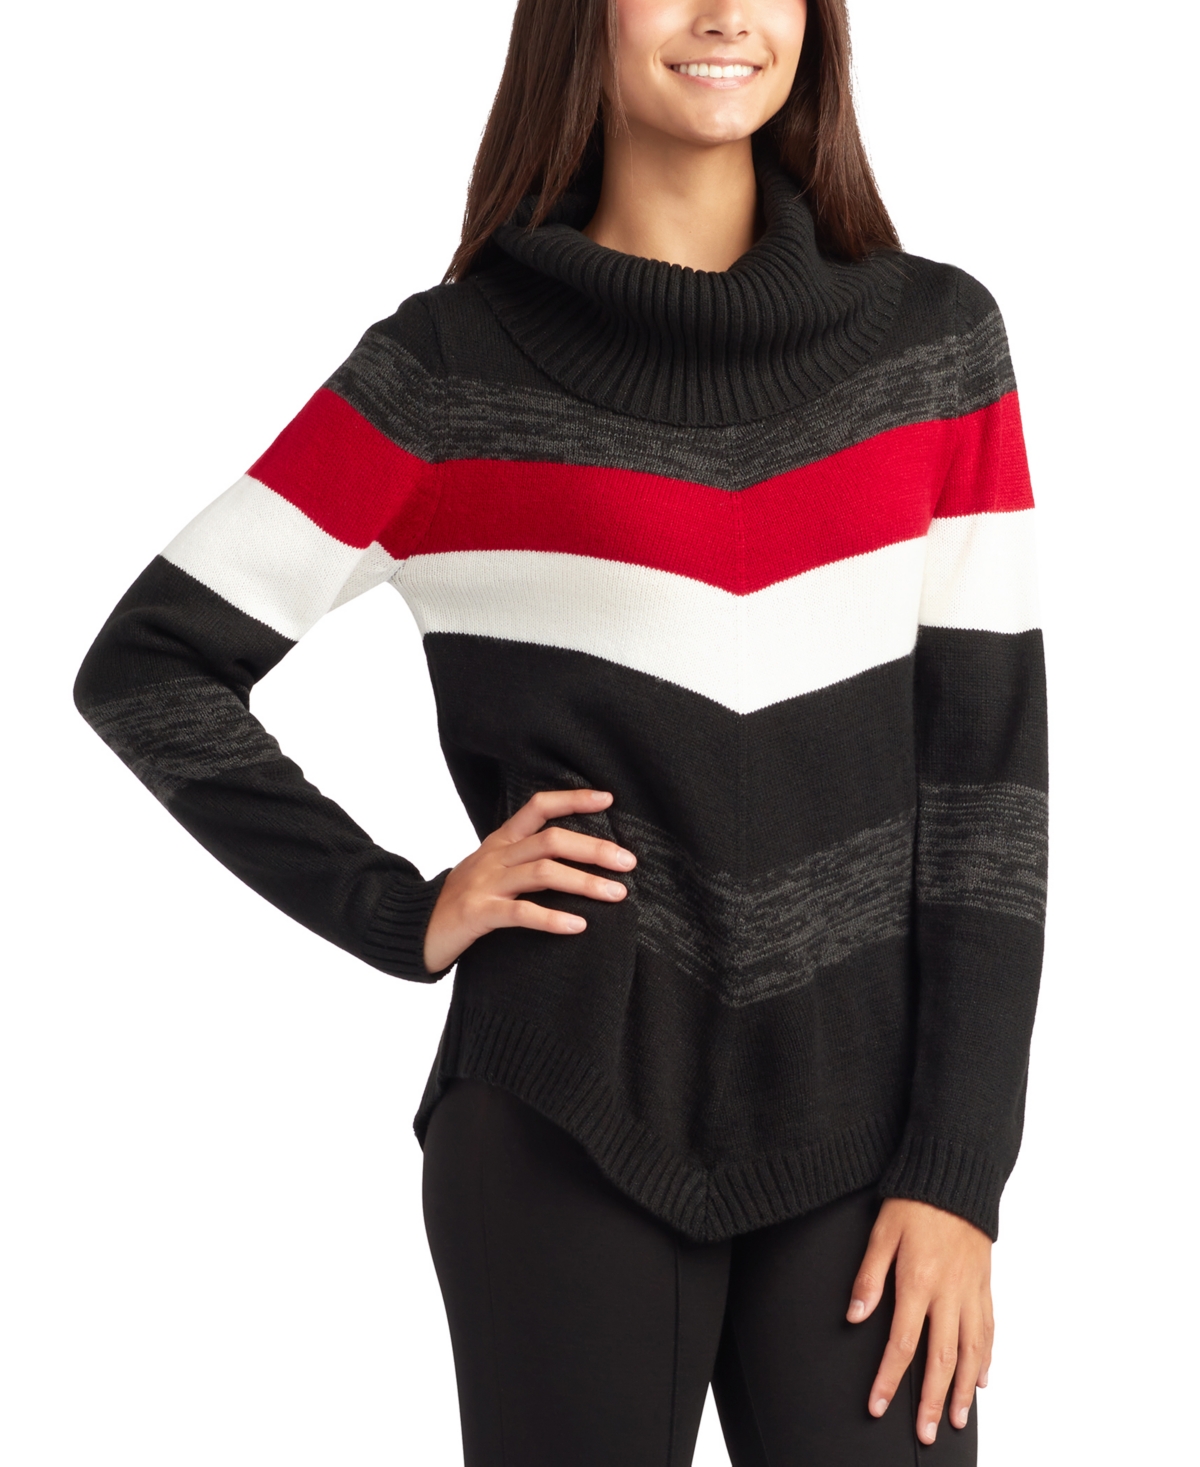 Juniors' Cowlneck Colorblocked Sweater - Red